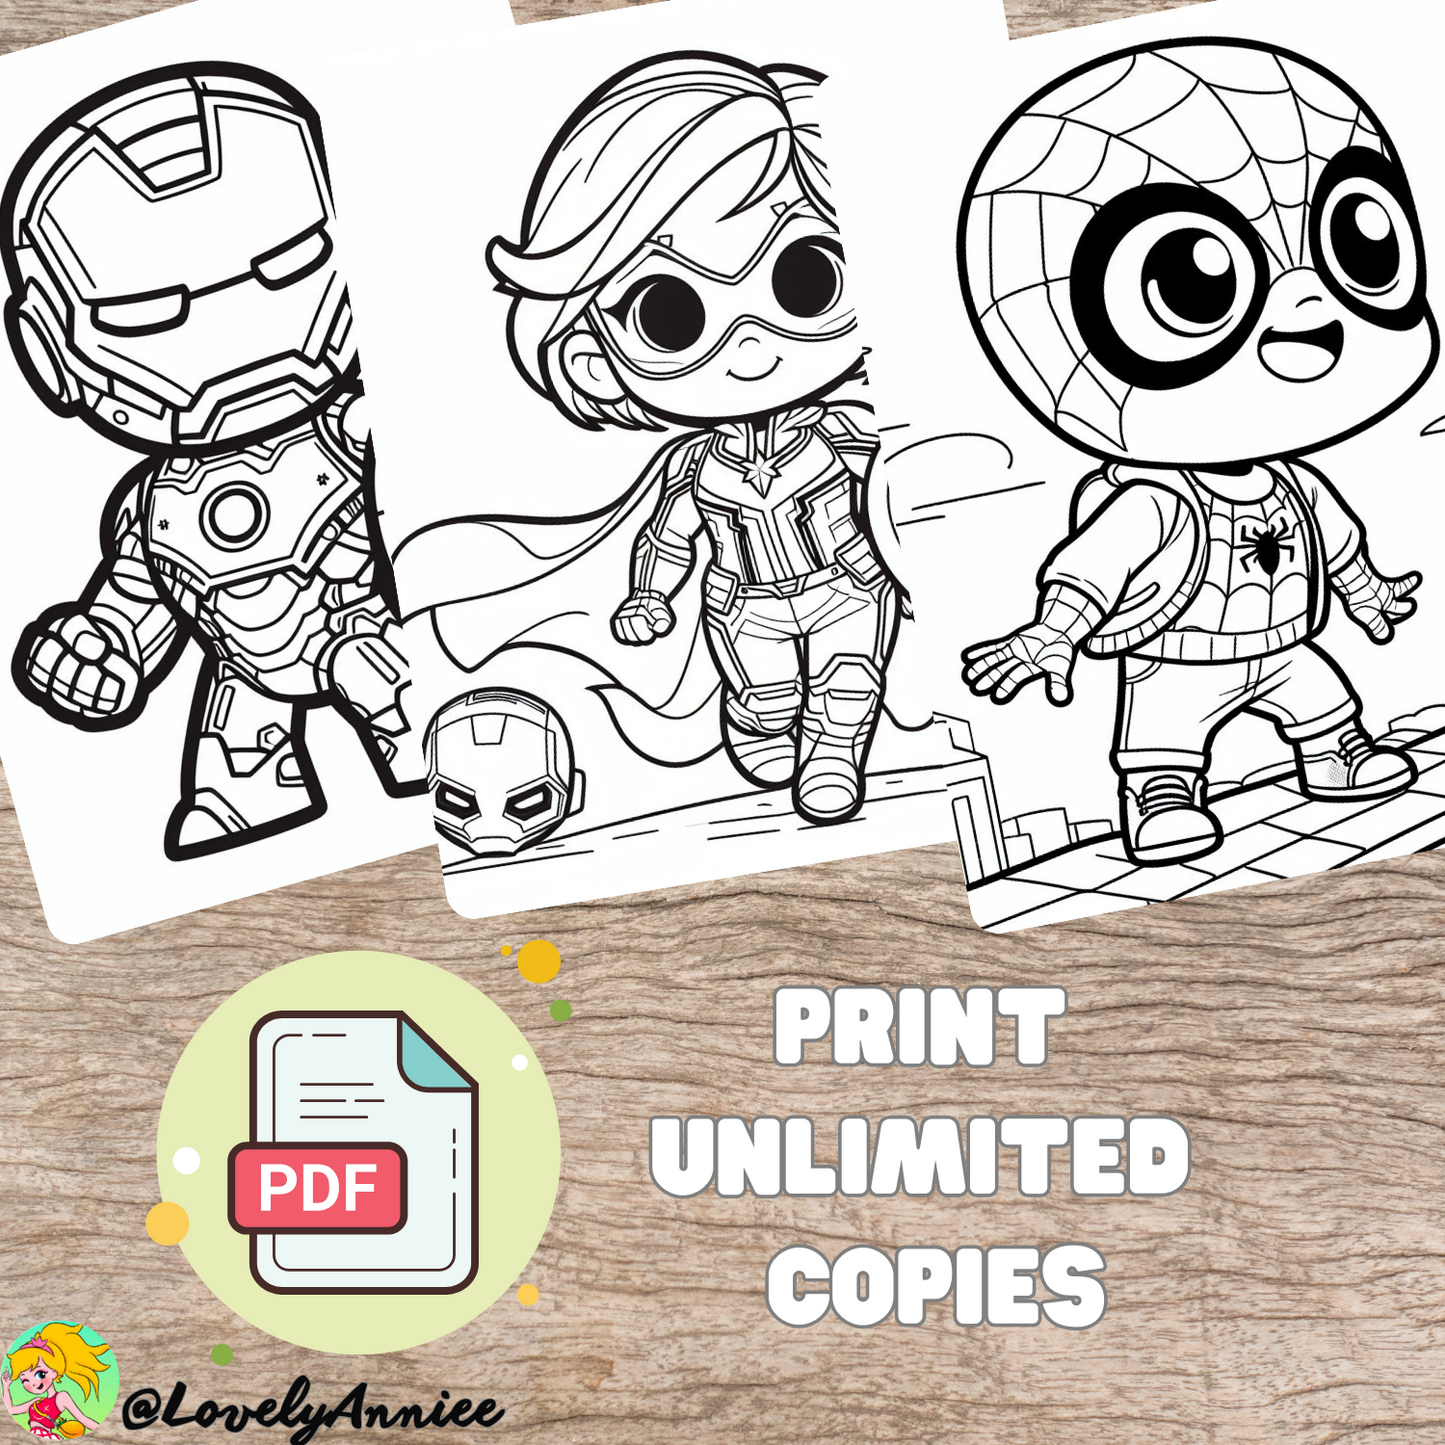 Super Hero Coloring Book Printables, Coloring Book Pages, Kids Coloring Book, Superhero Coloring,Fun Activity For Kids 🌈 Woa Doll Crafts